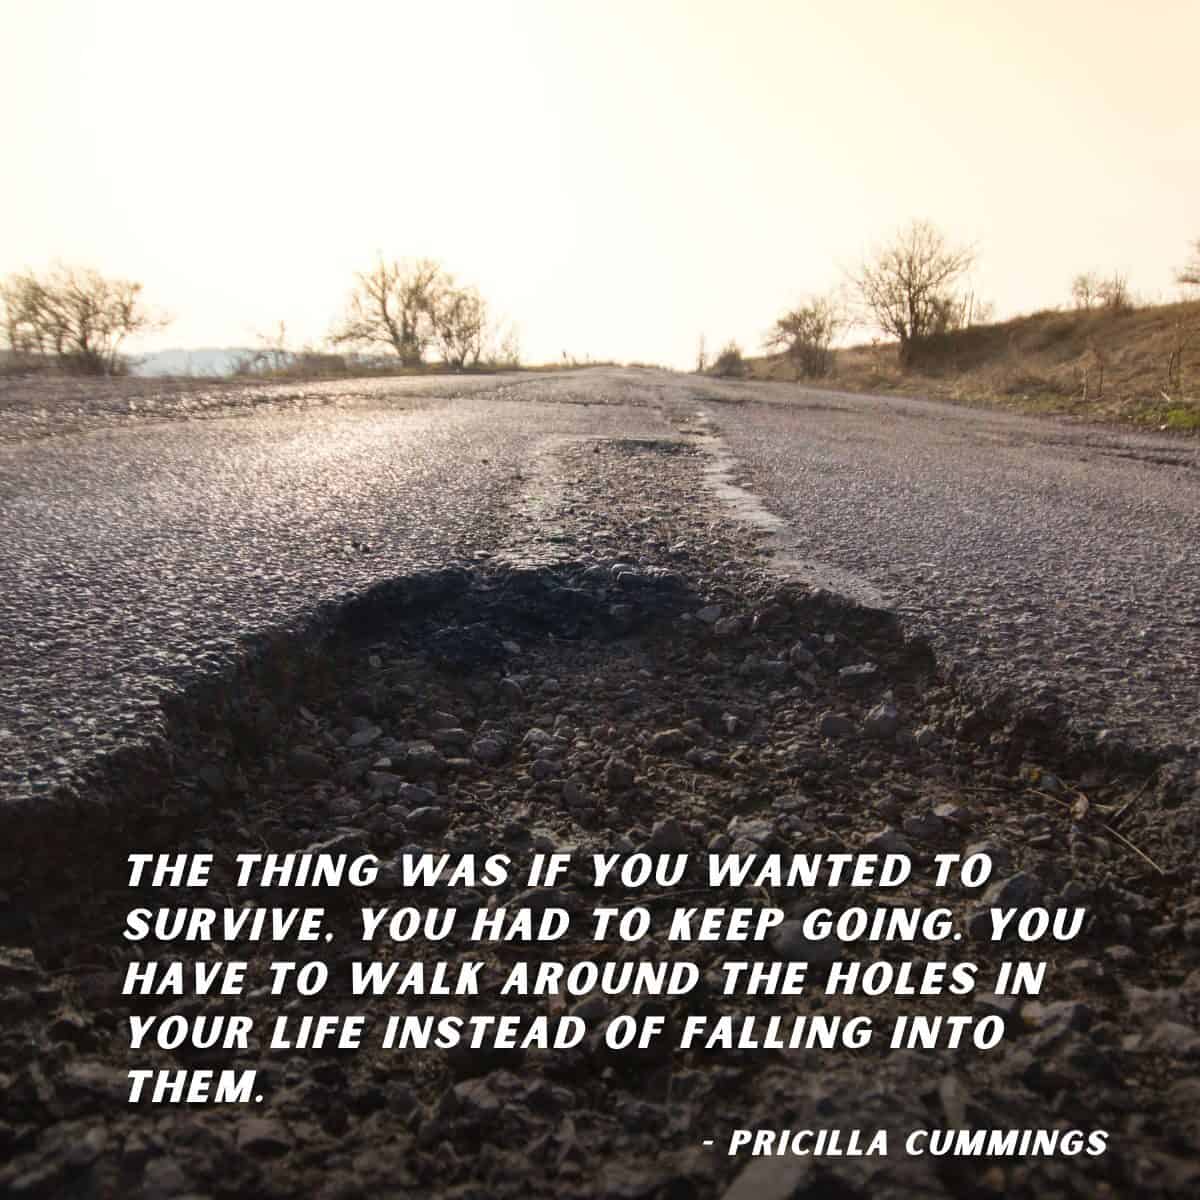 The thing was if you wanted to survive, you had to keep going. You have to walk around the holes in your life instead of falling into them.